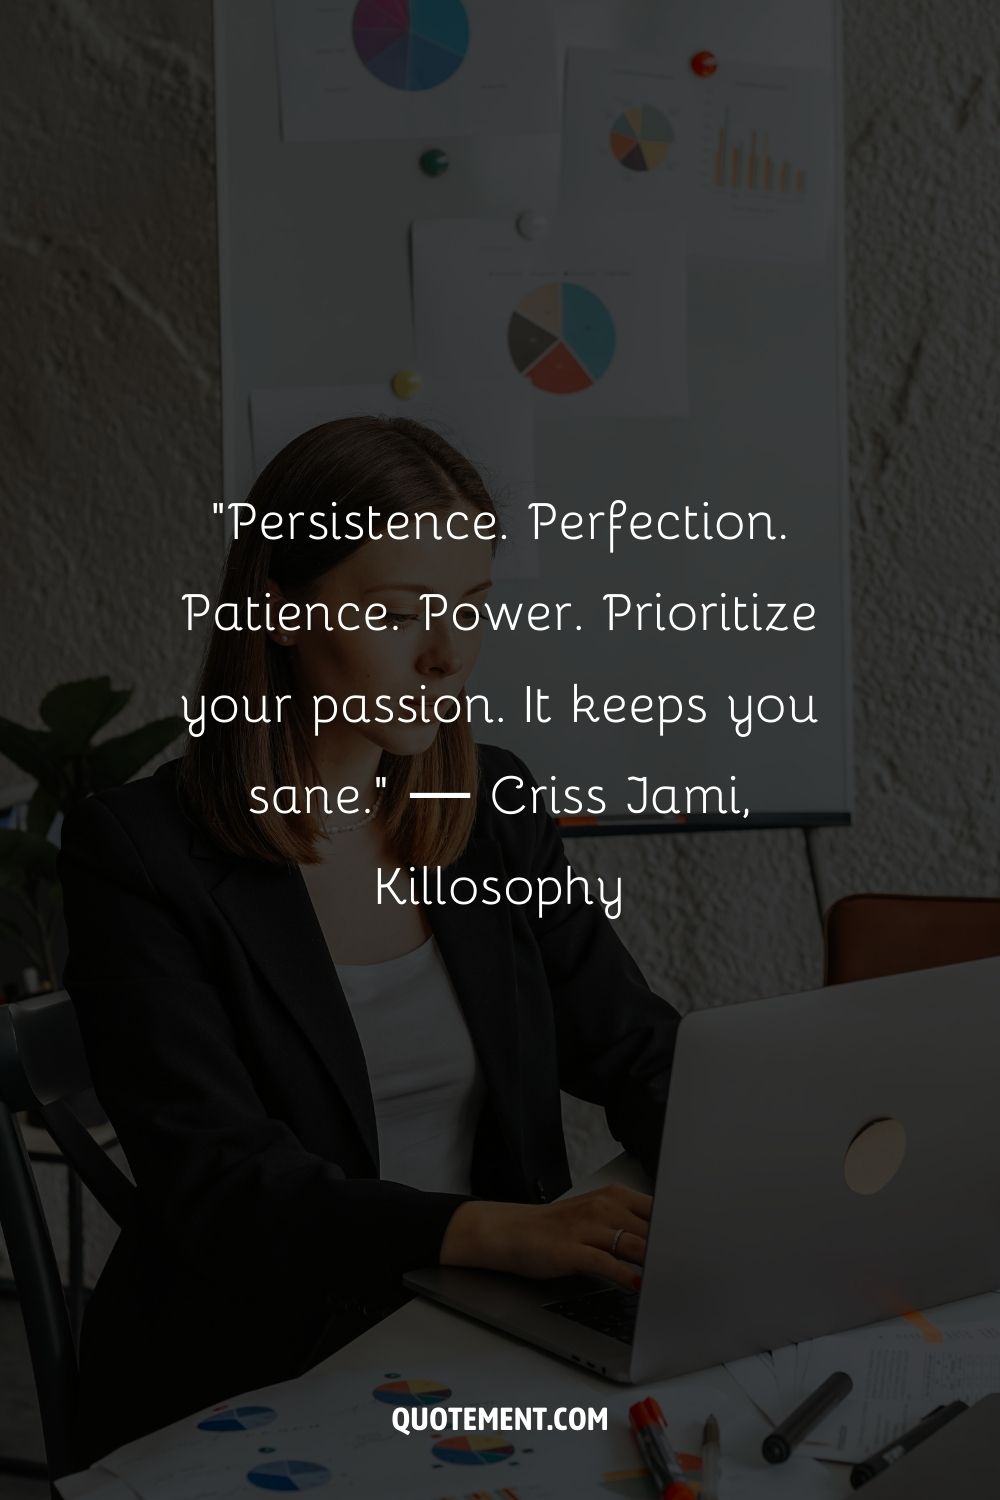 “Persistence. Perfection. Patience. Power. Prioritize your passion. It keeps you sane.” ― Criss Jami, Killosophy